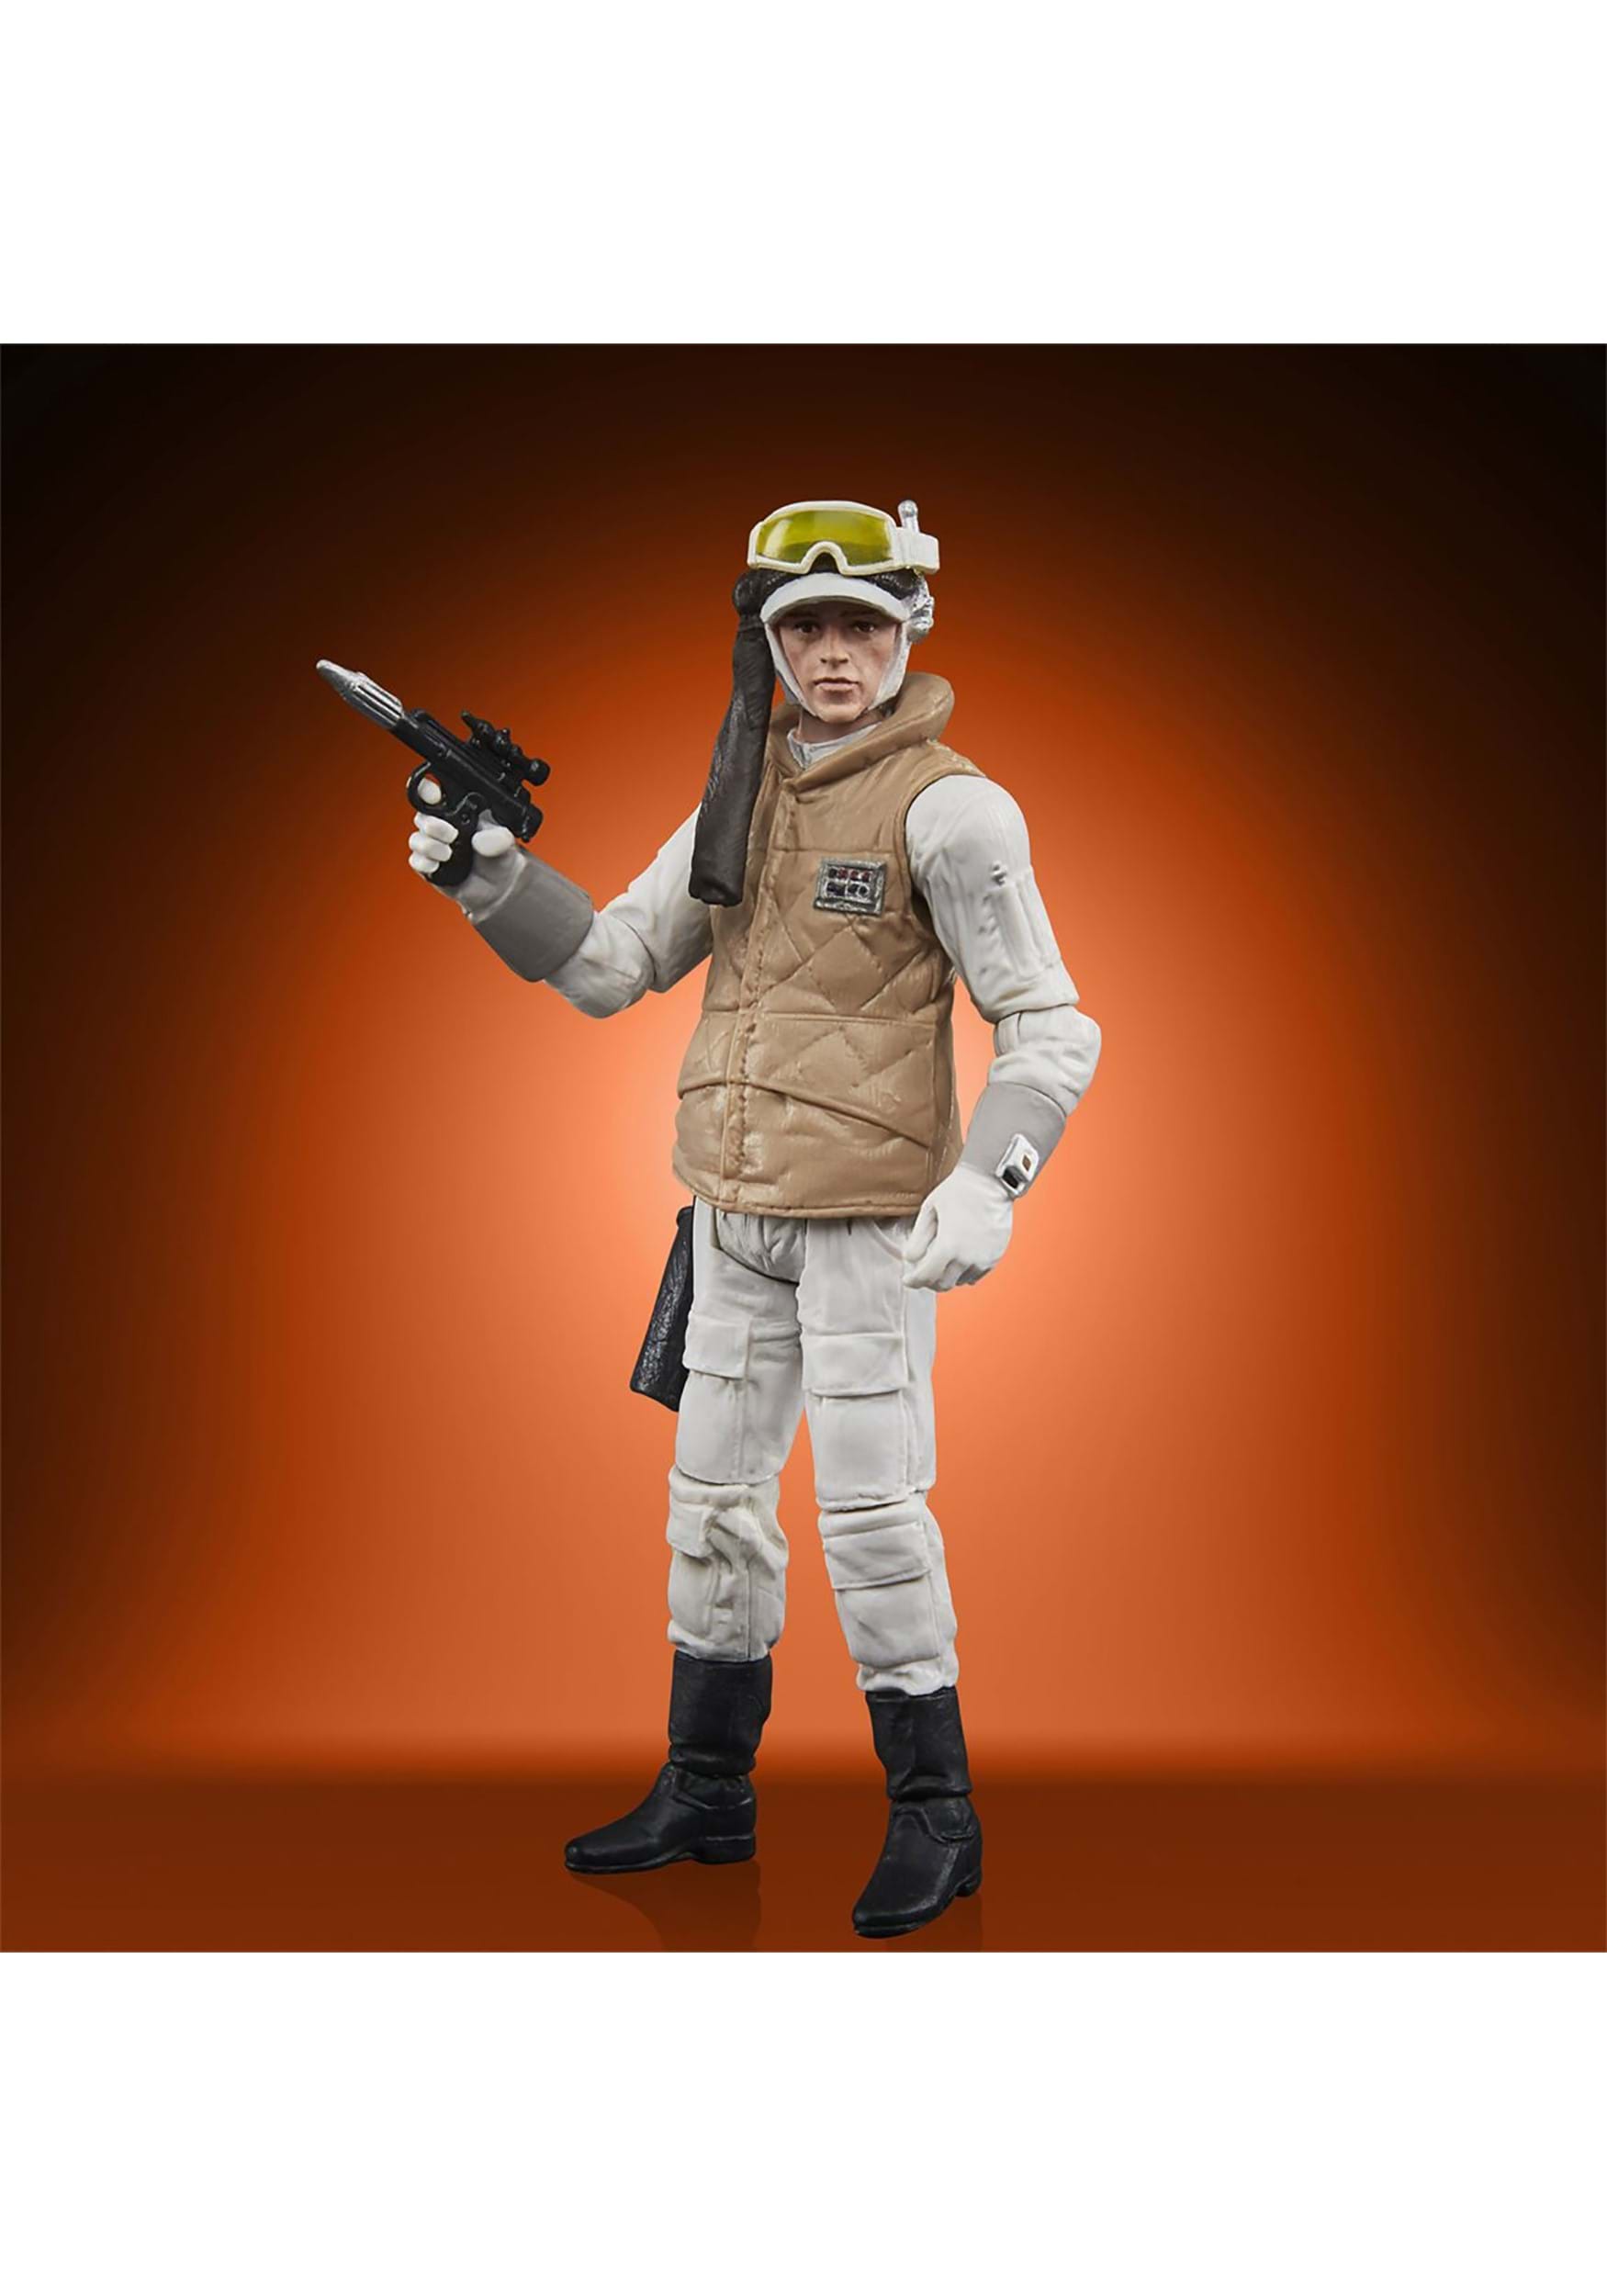 https://images.fun.com/products/78147/2-1-197102/star-wars-vintage-collection-hoth-rebel-soldier-fi-alt-1.jpg